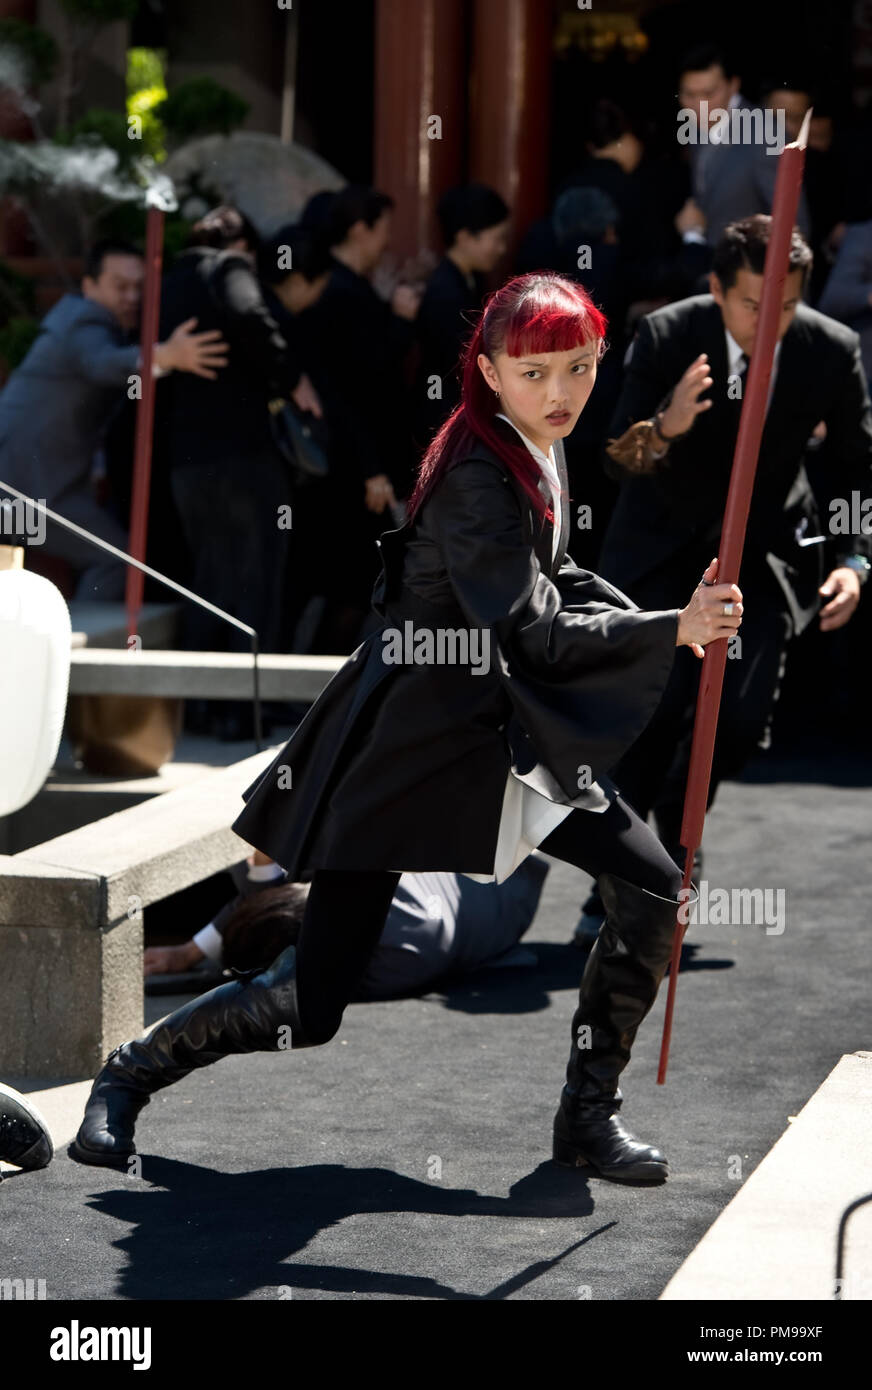 THE WOLVERINE. Yukio (Rila Fukushima) is about to be hurtled into an epic struggle. Photo credit: Ben Rothstein. Stock Photo